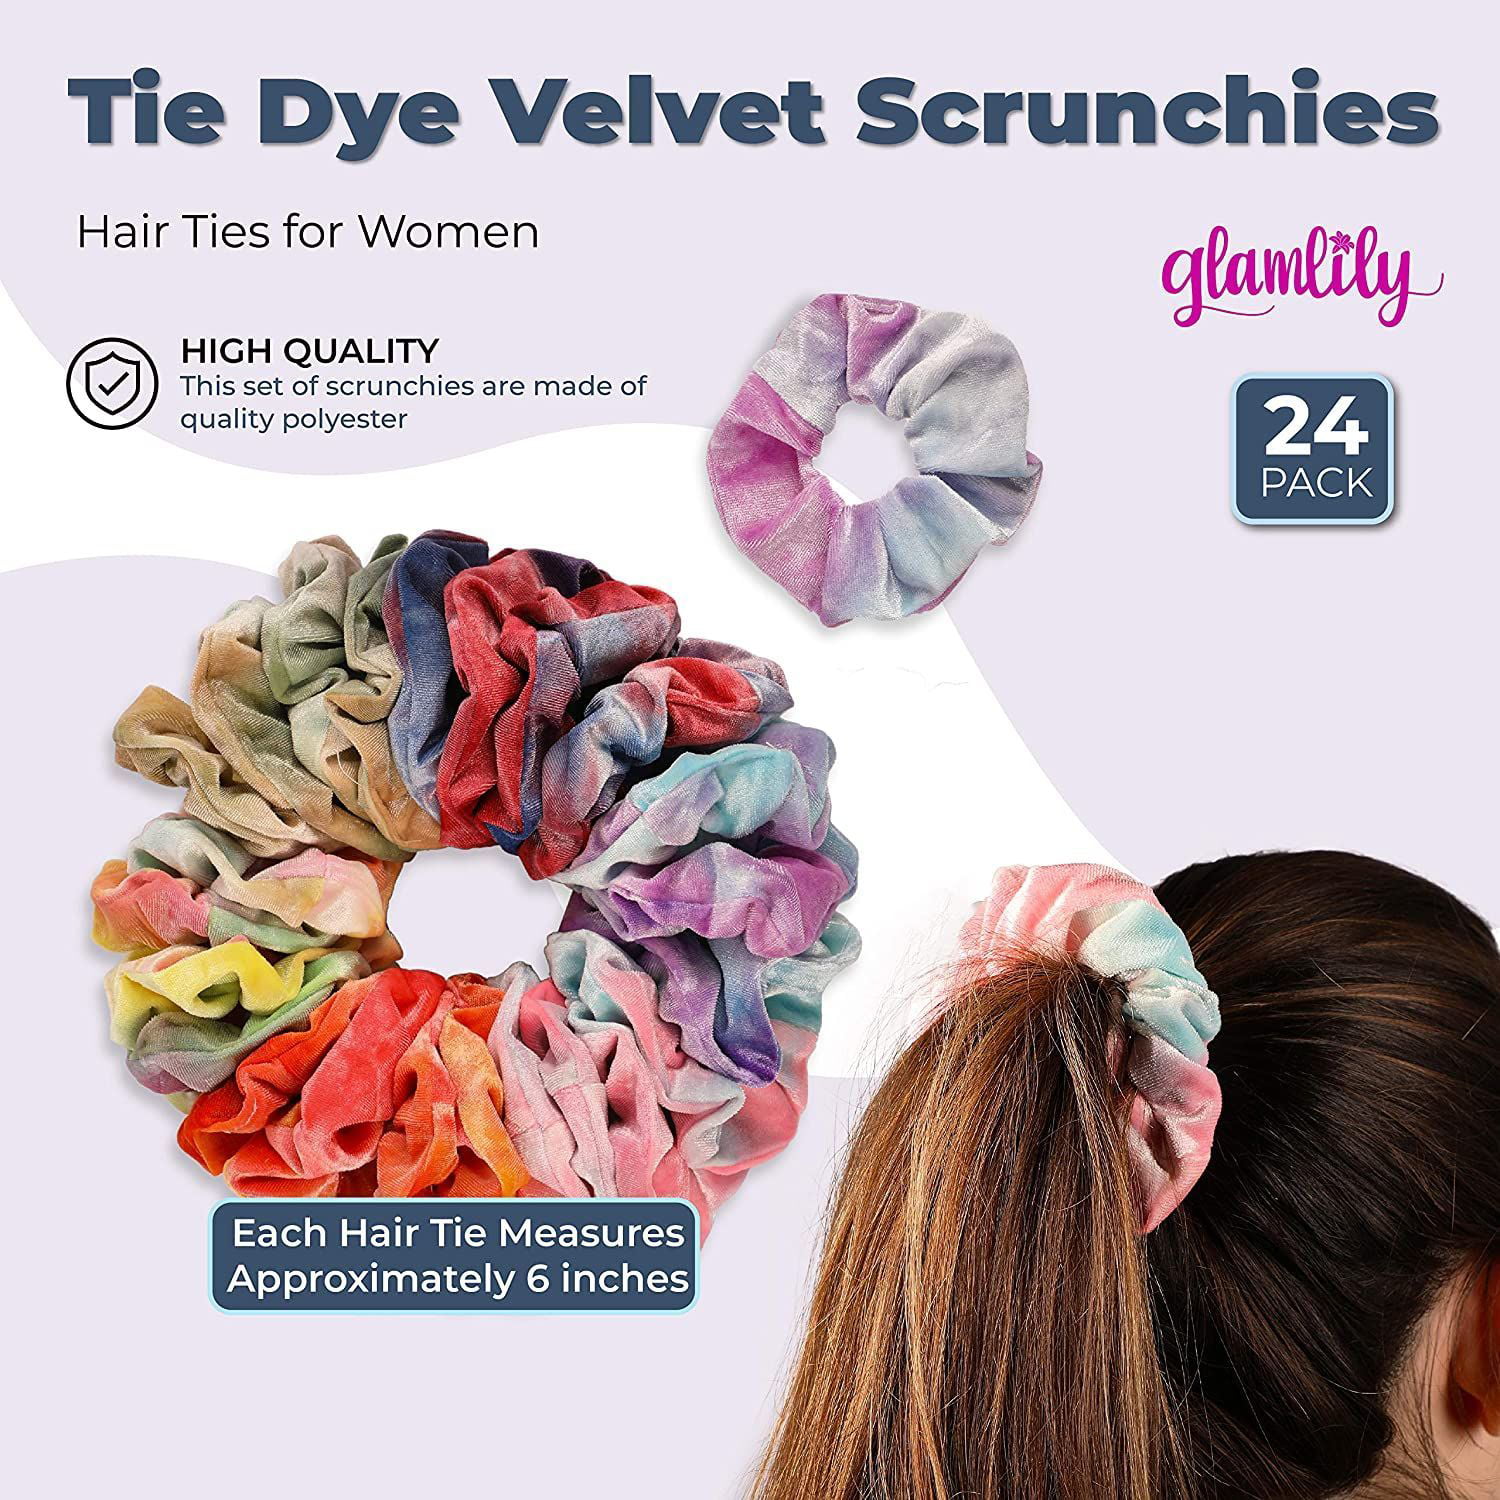 Details about   2PCS Soft Velvet Hair Scrunchies Tie-Dye Elastic Hair Ties Ponytail Holder Gifts